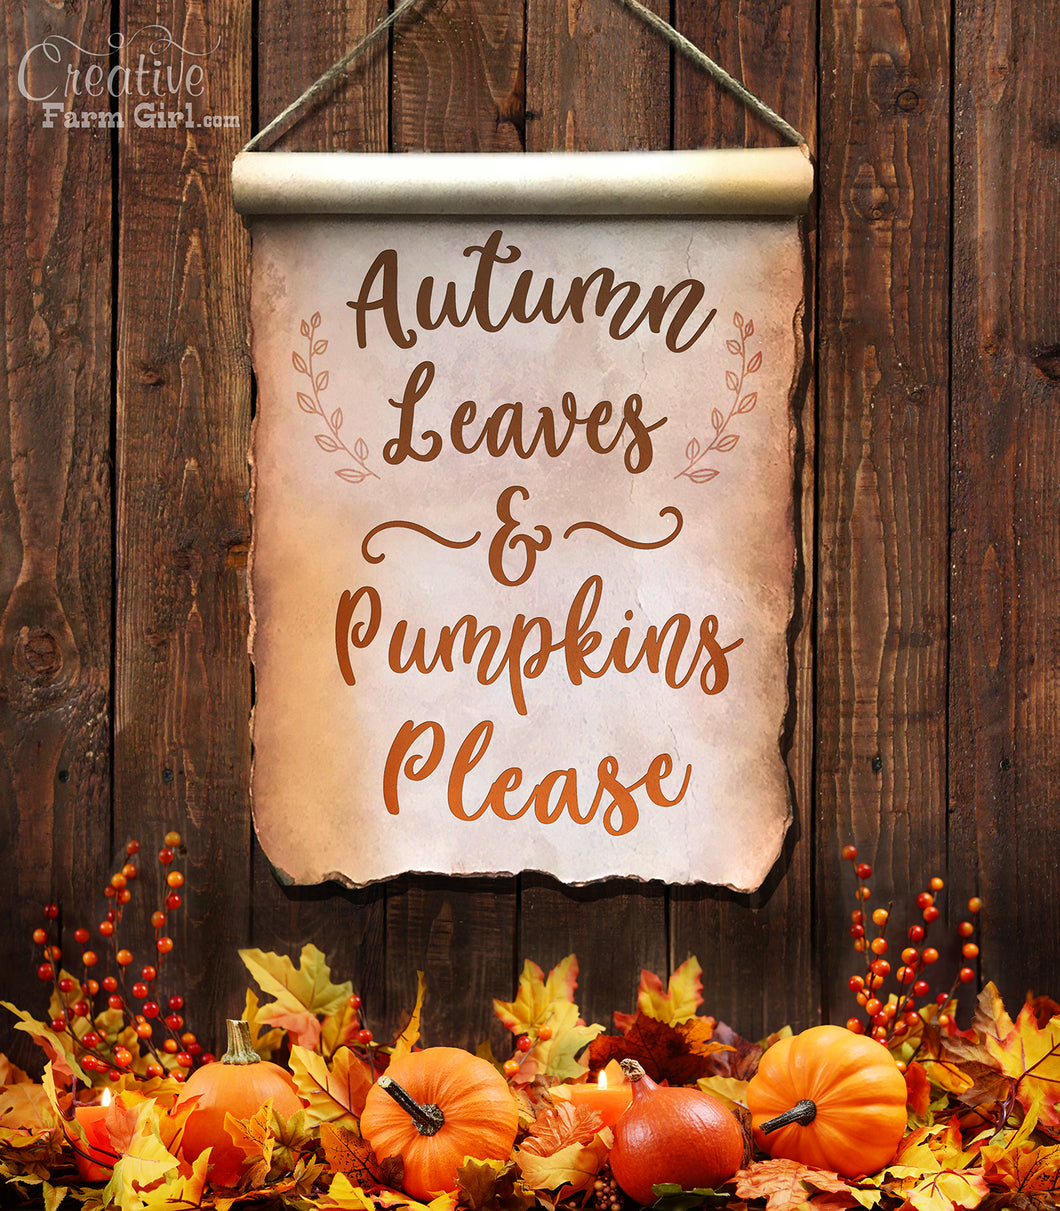 Autumn Leaves and Pumpkins Please Sign